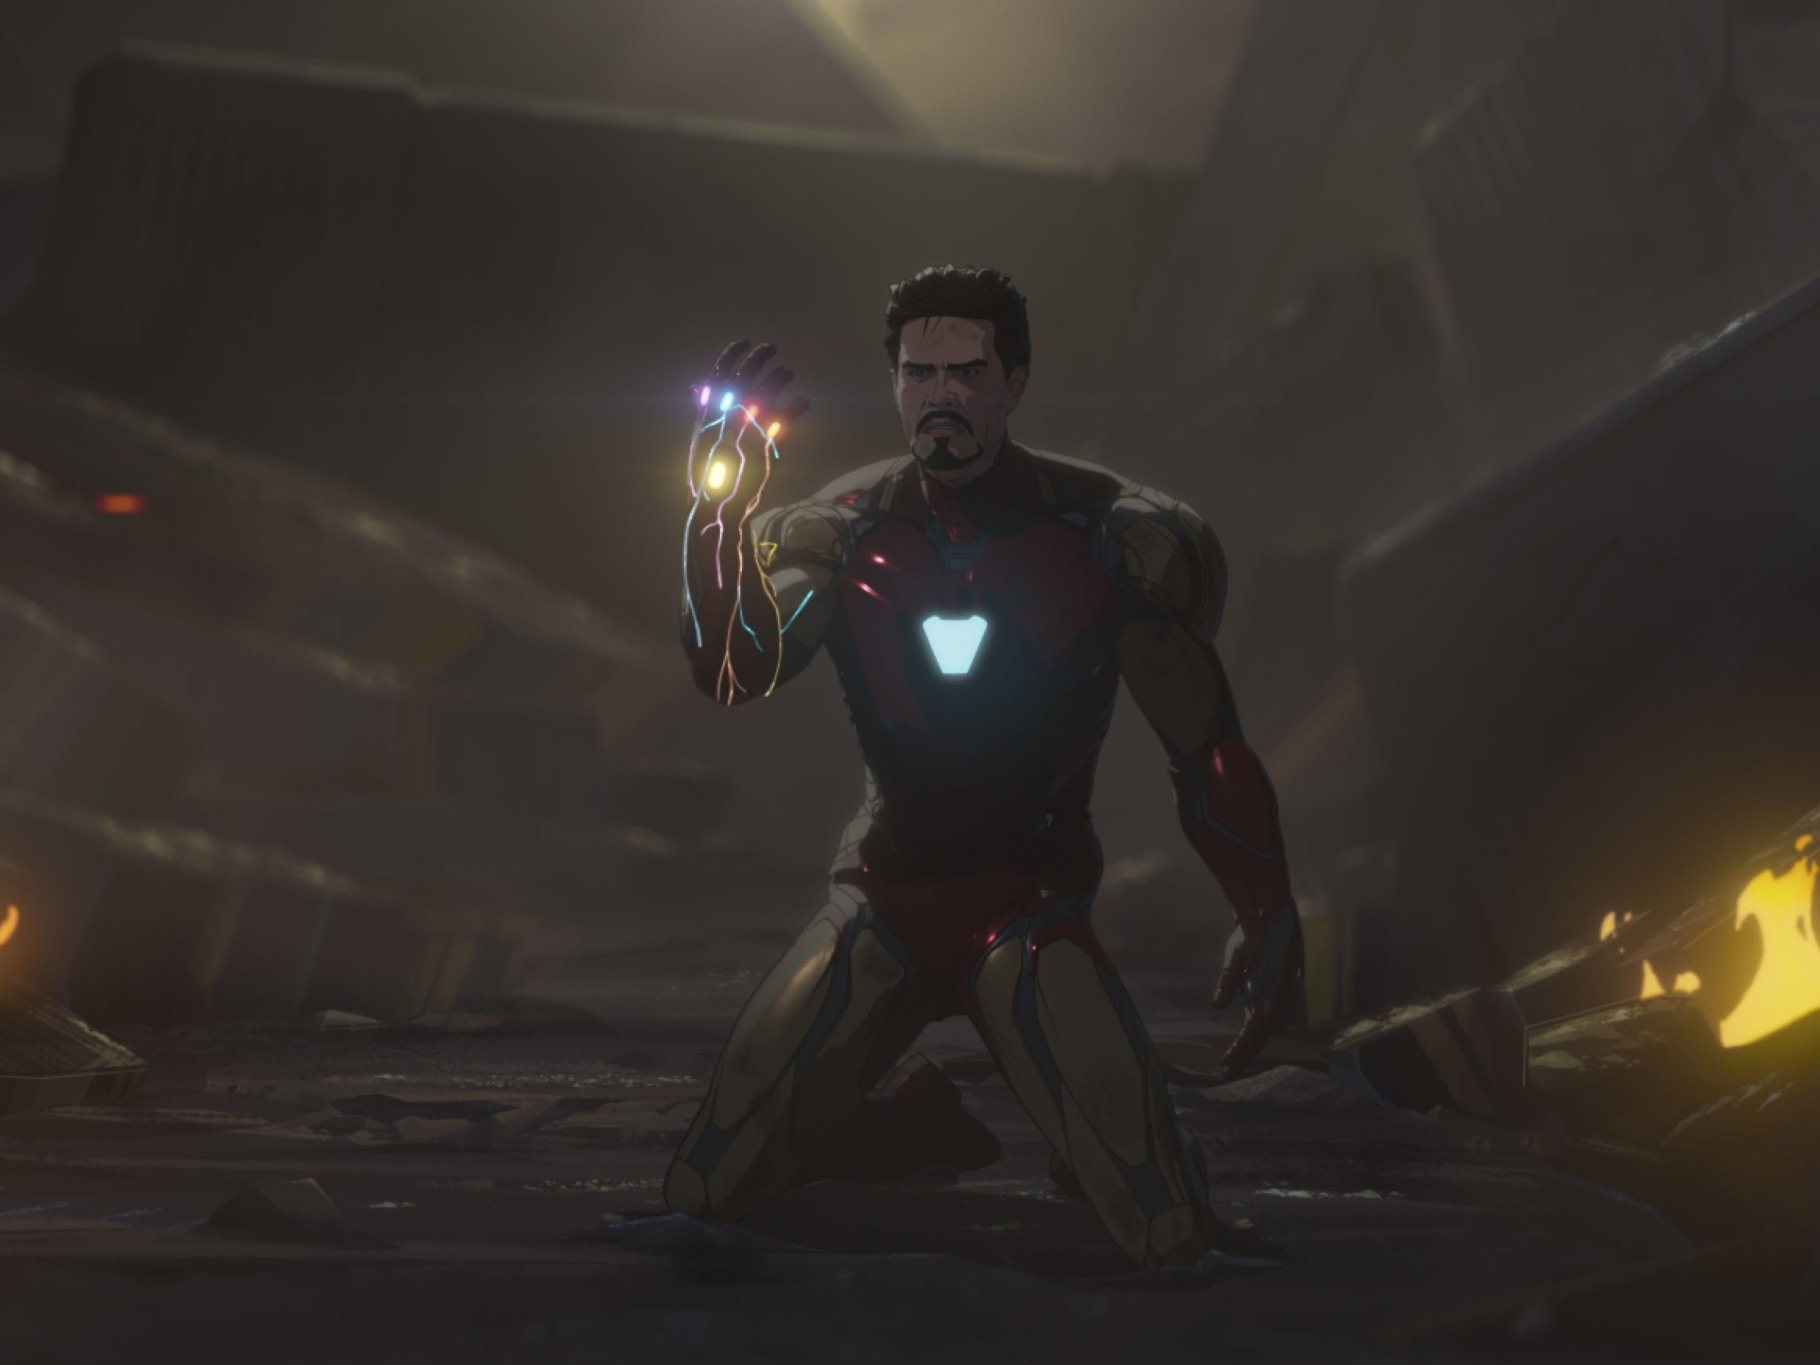 Tony Stark in Marvel's 'What If...?' The image shows him with the Infinity Stones in his gauntlet right before he snaps Thanos away.